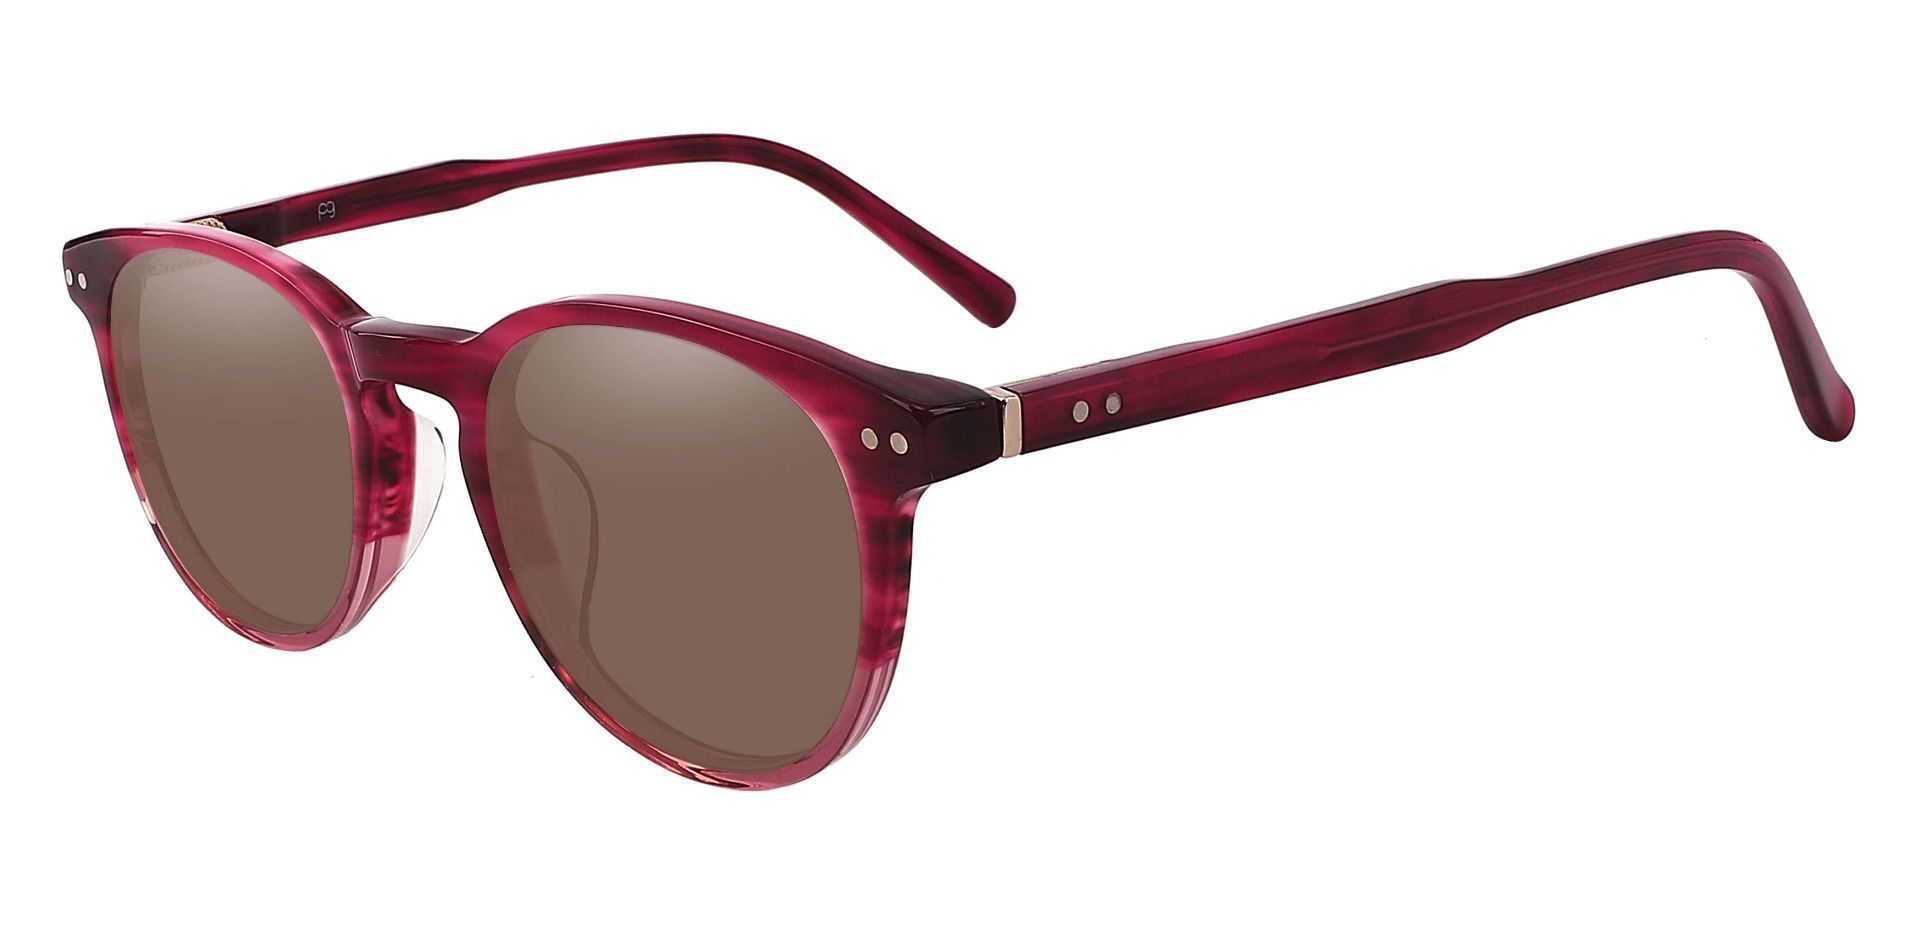 Marianna Oval Non-Rx Sunglasses - Red Frame With Brown Lenses